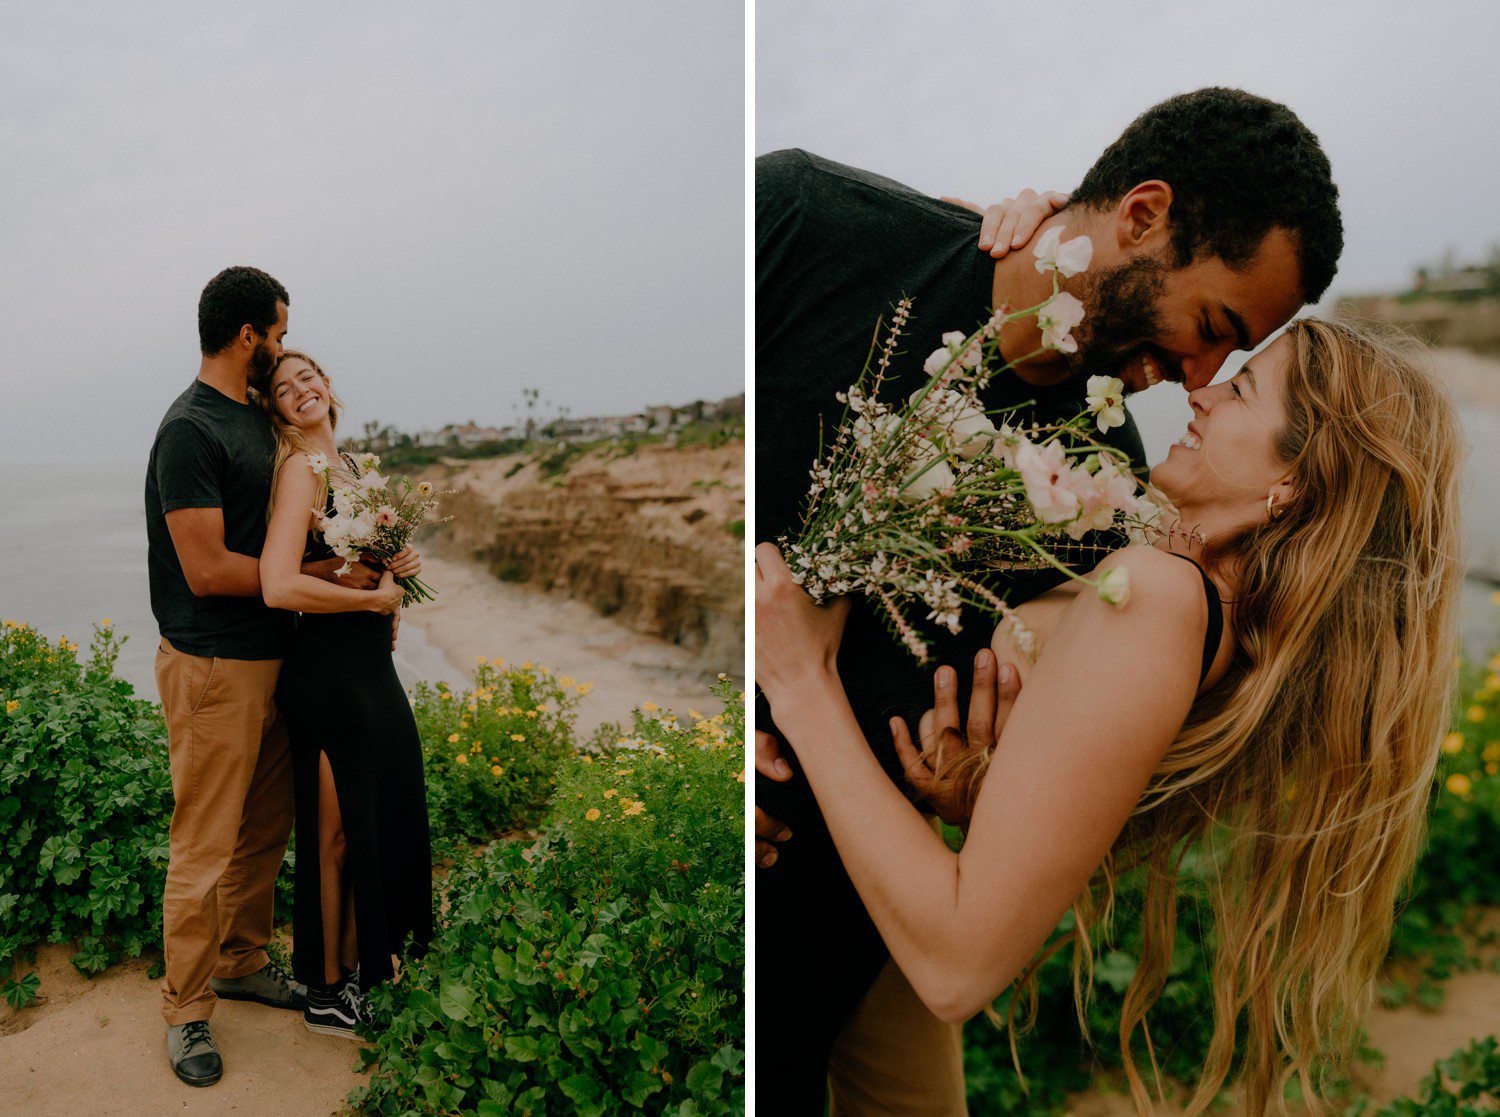 Couples session at Sunset Cliffs with bouquet of flowers.